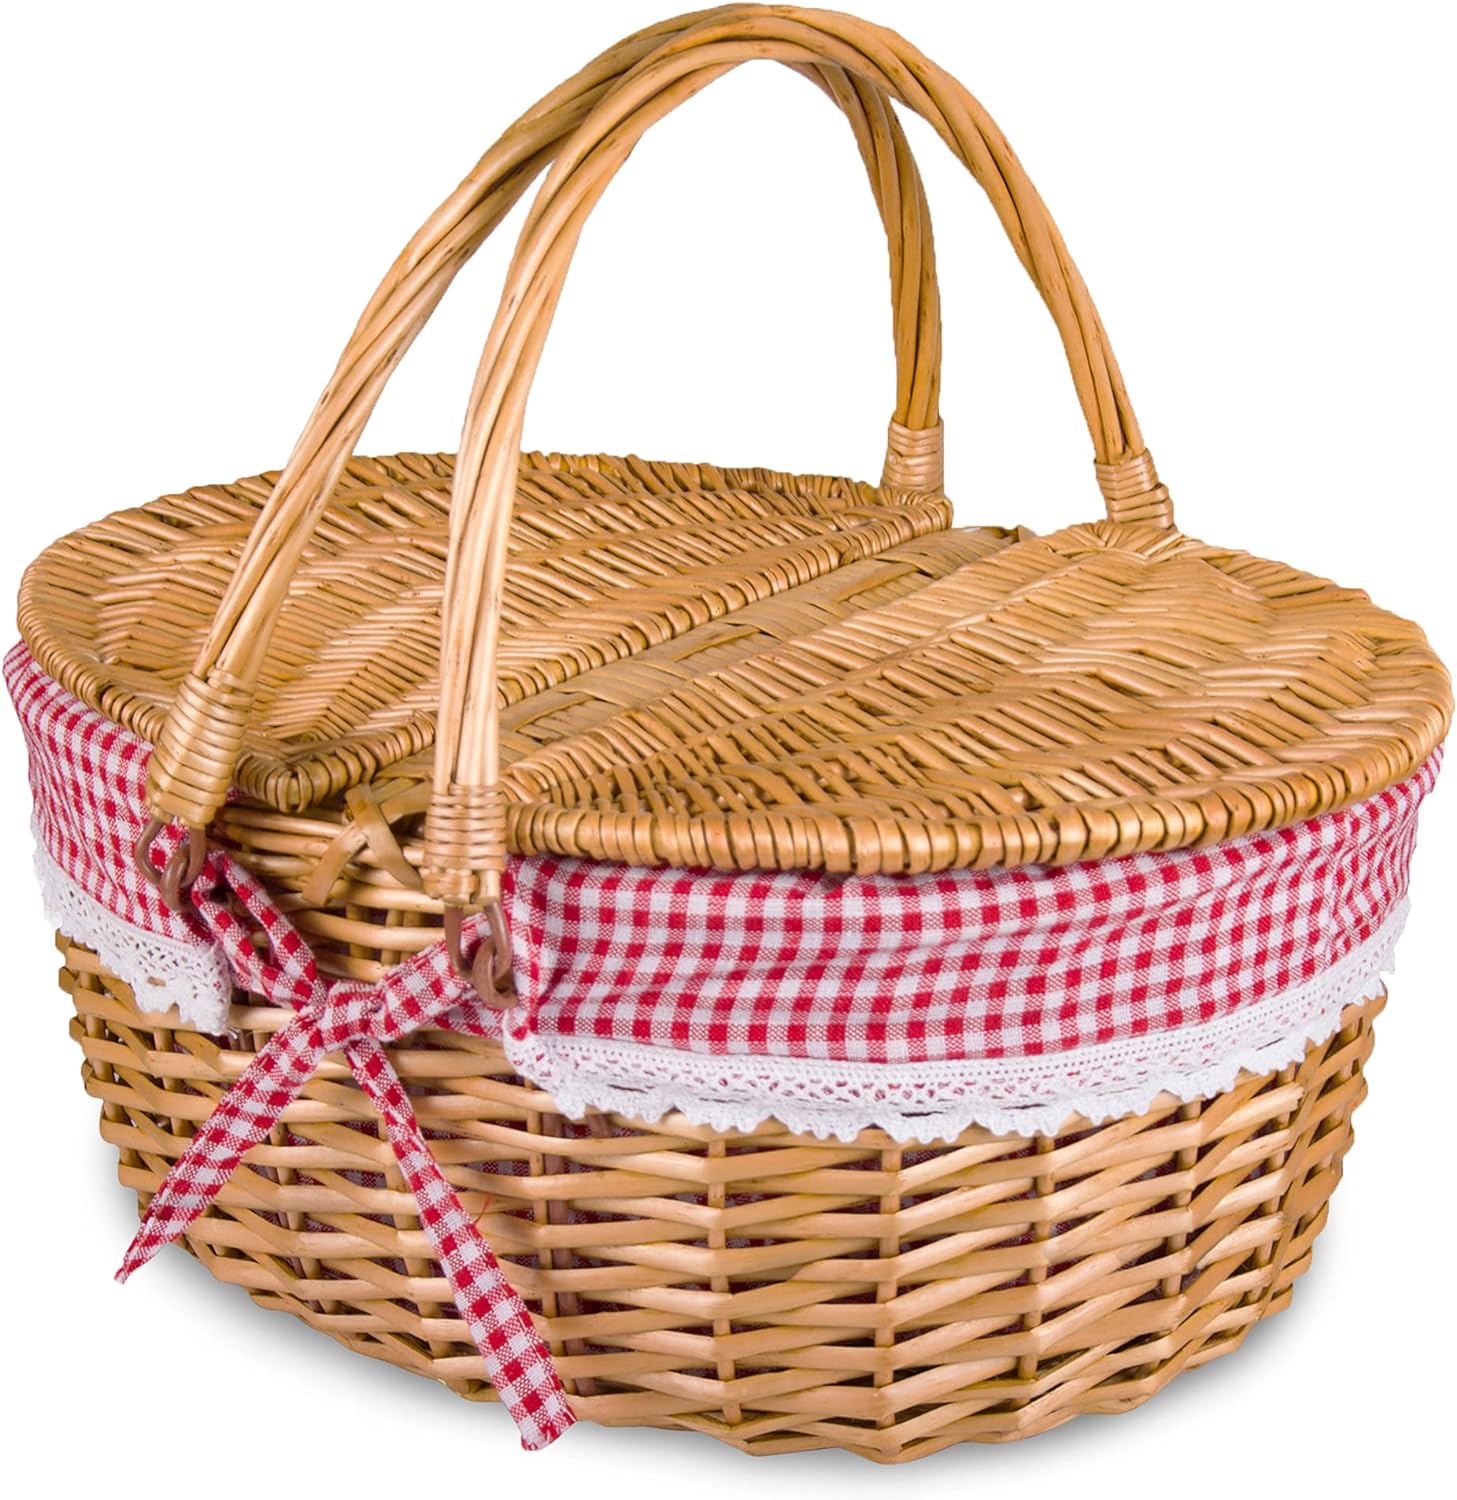 Traditional Wicker Picnic Baskets